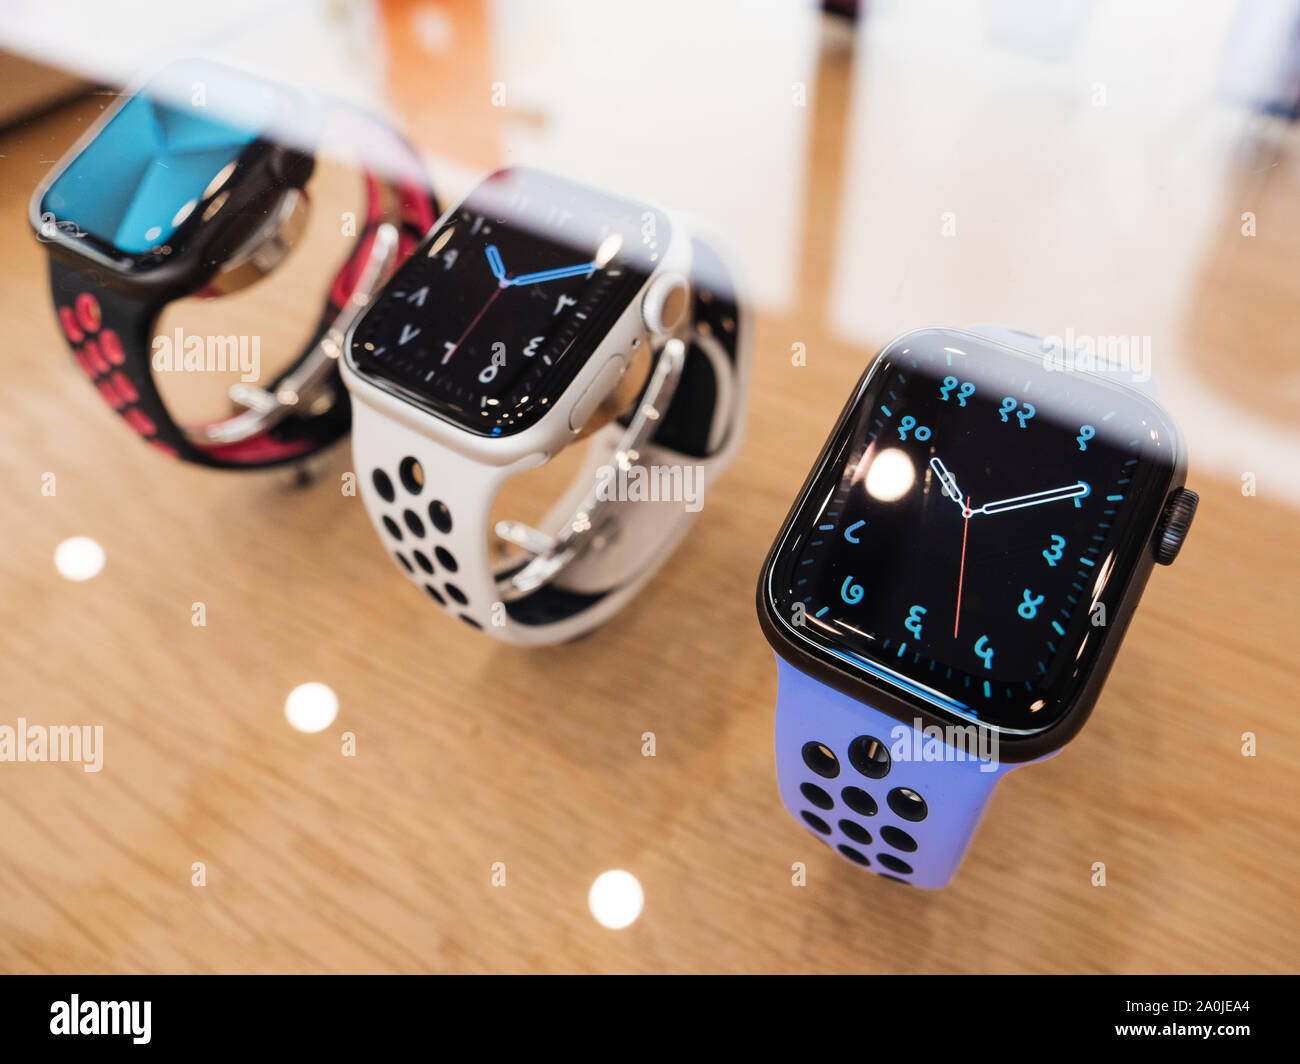 Paris, France - Sep 20, 2019: New Nike Sport wearable Apple Watch Series 5  presentation sale in Apple Store with watchOS 6 and new OLED display, which  can stay always on Stock Photo - Alamy